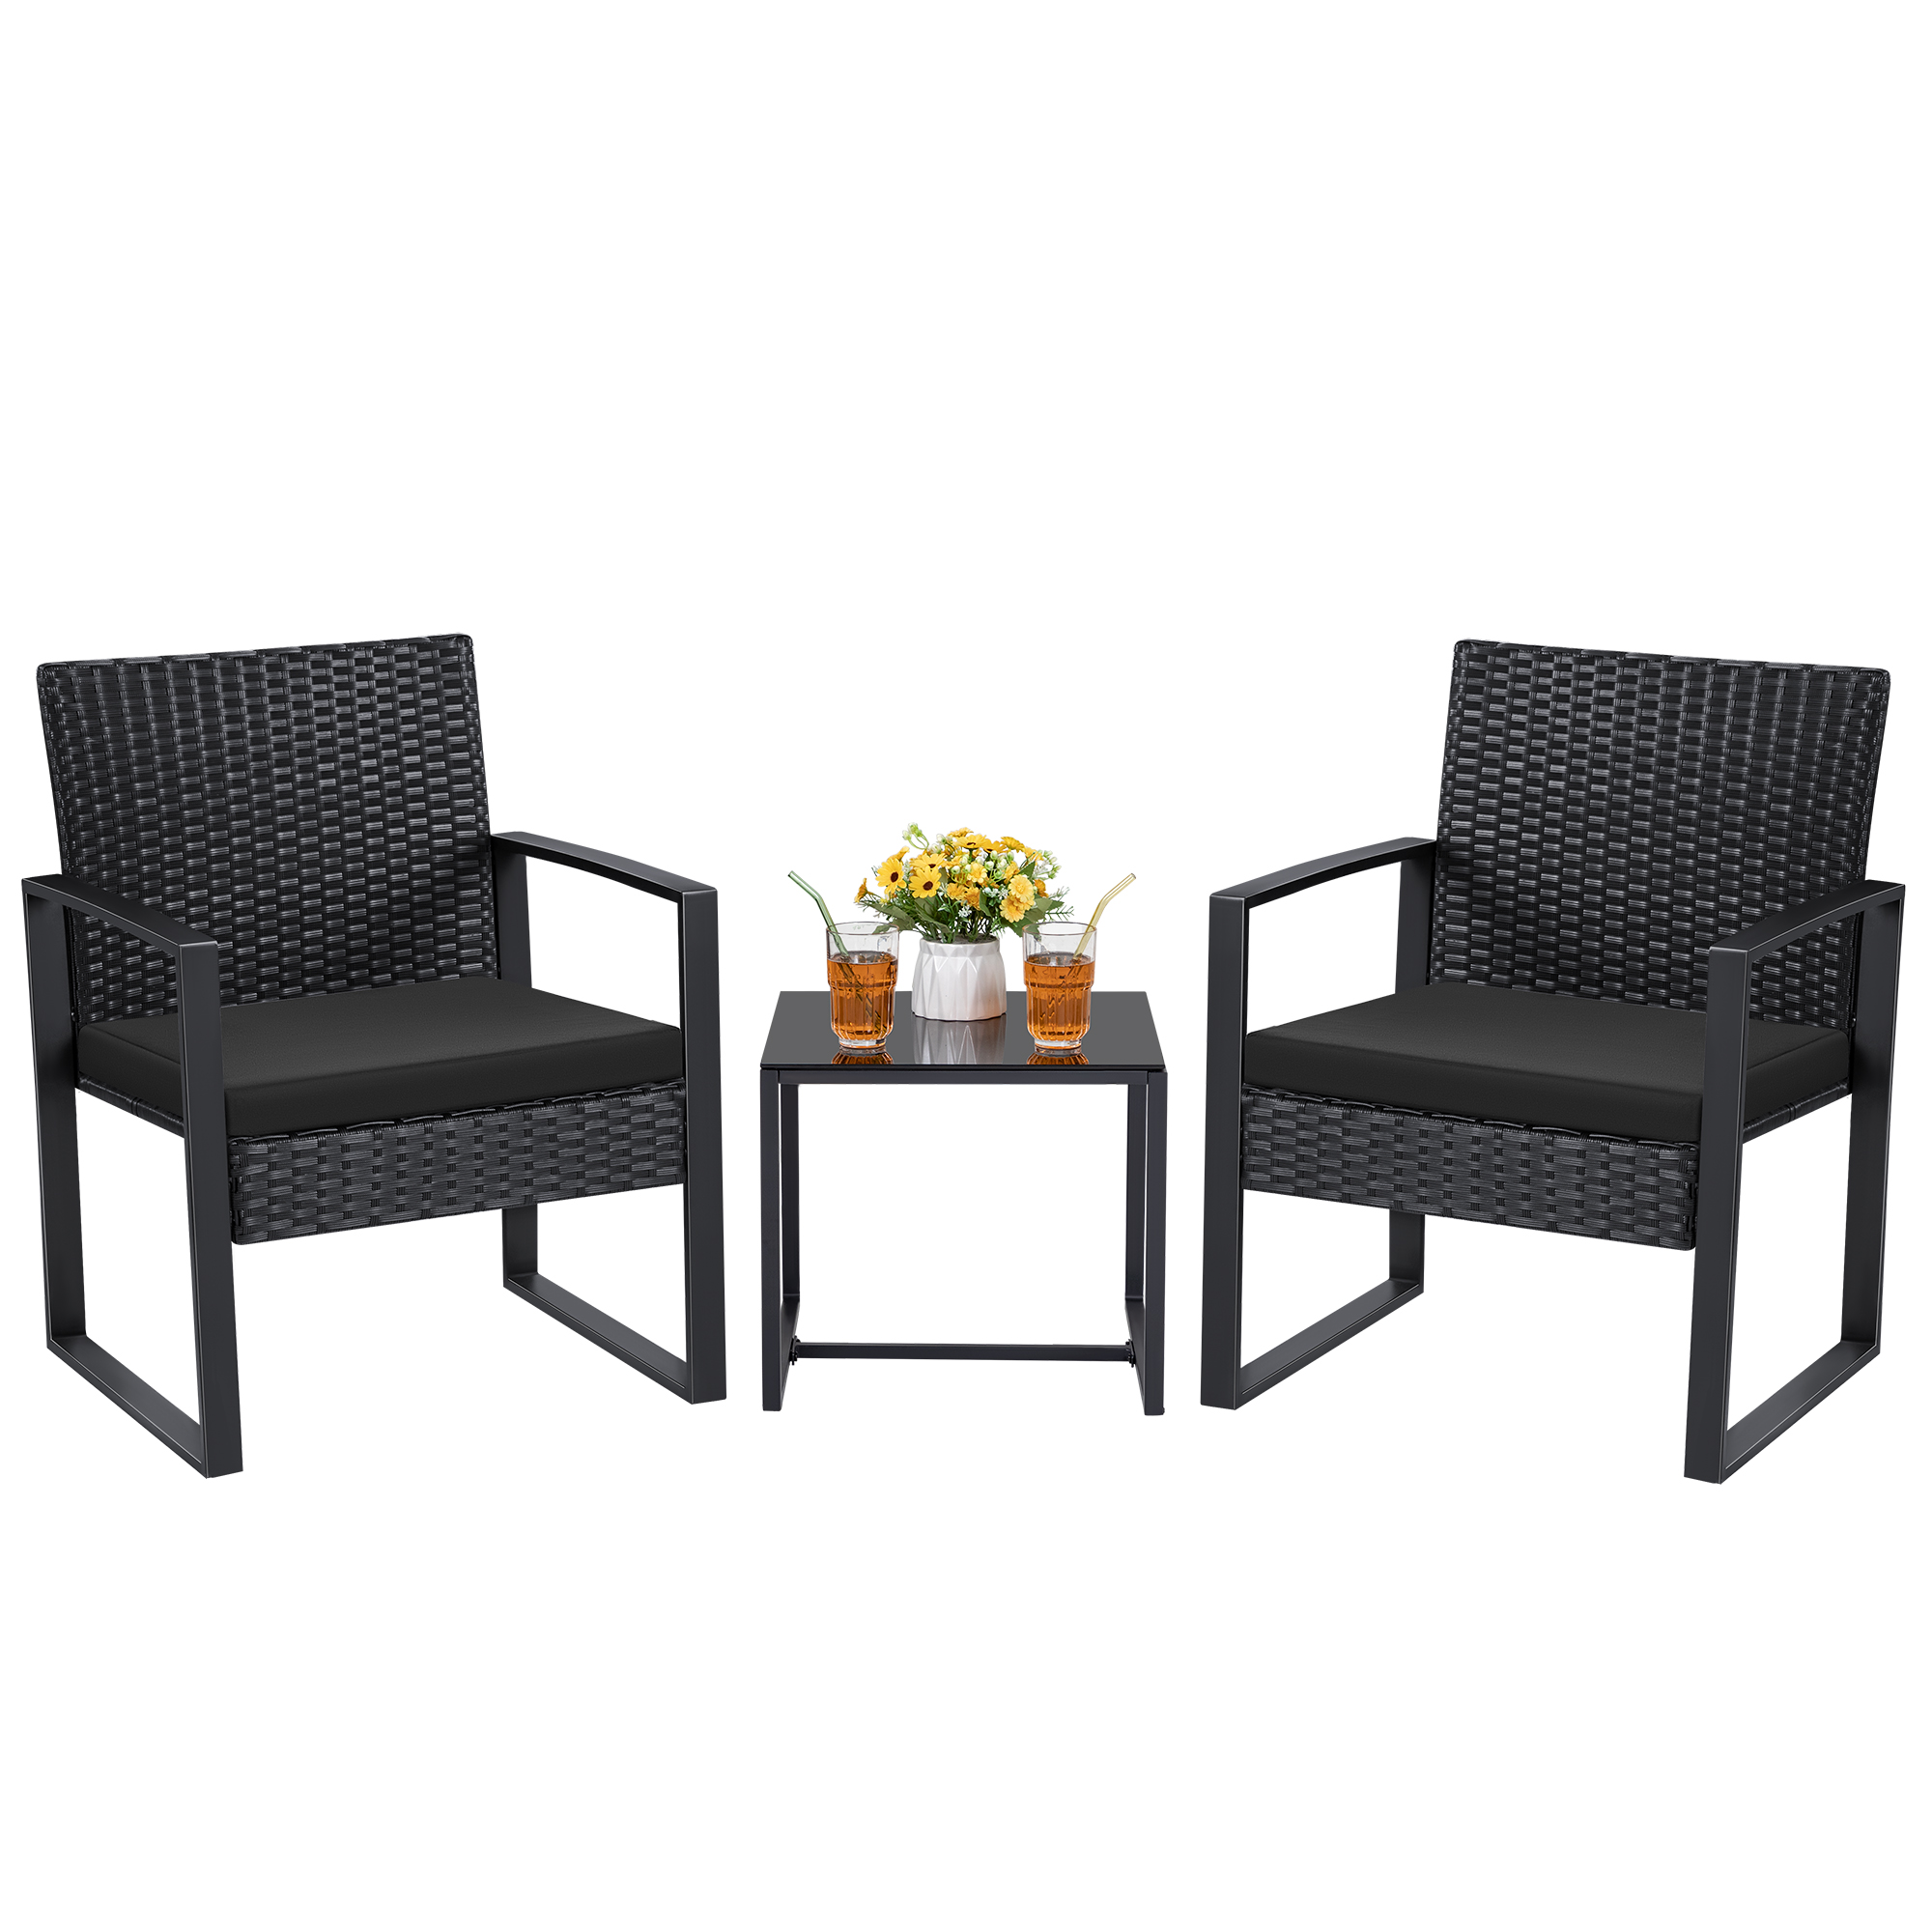 Lacoo 3 Pieces Patio Conversation Set PE Rattan Bistro Chairs Set of 2 with Coffee Table, Black - image 1 of 8